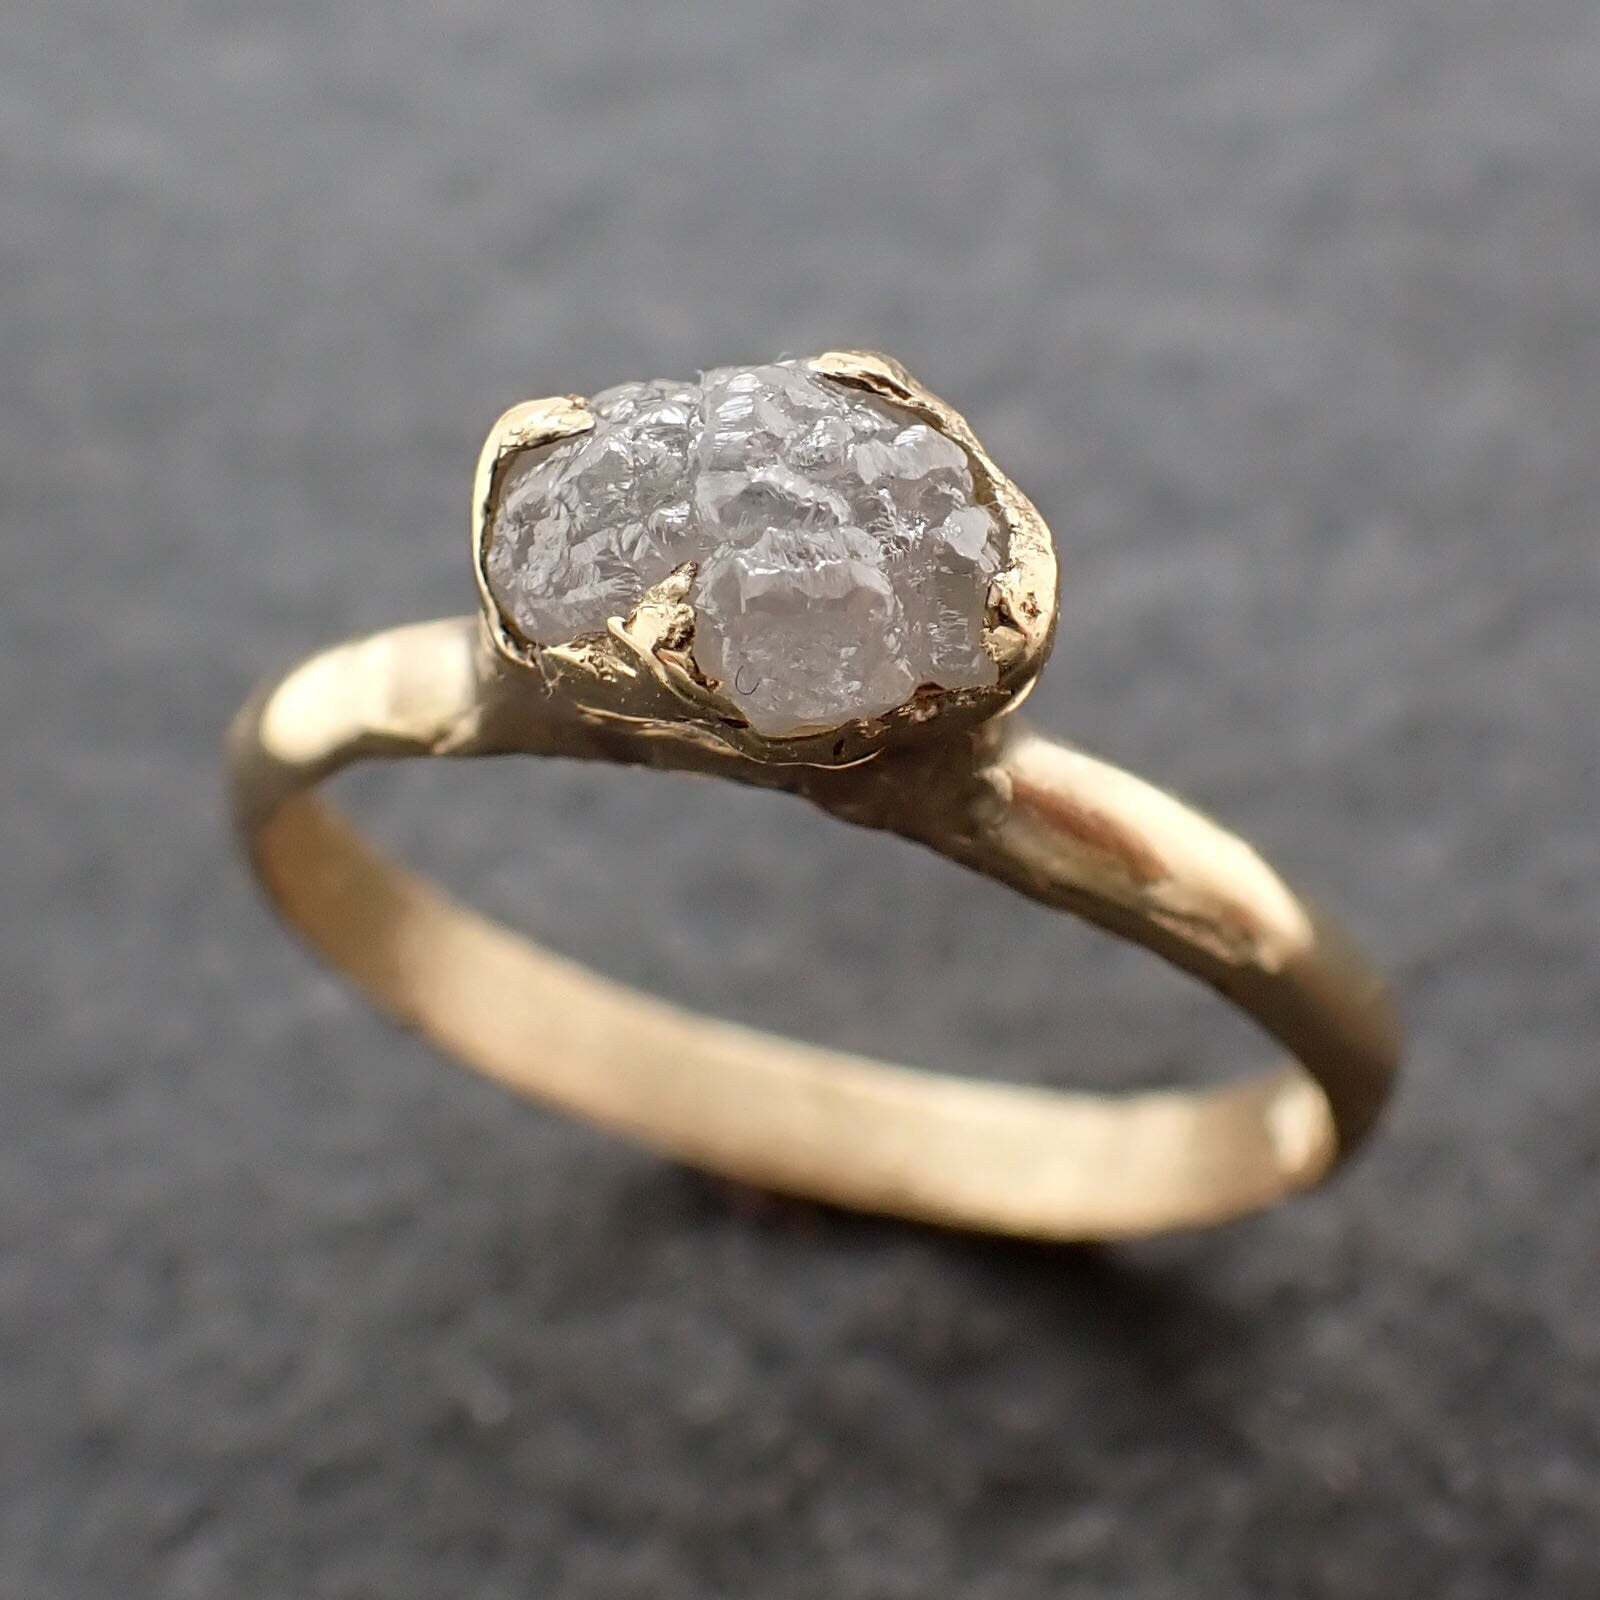 Raw Diamond Engagement Ring Rough Uncut Diamond Solitaire Recycled 14k yellow gold Conflict Free Diamond Wedding Promise 3078